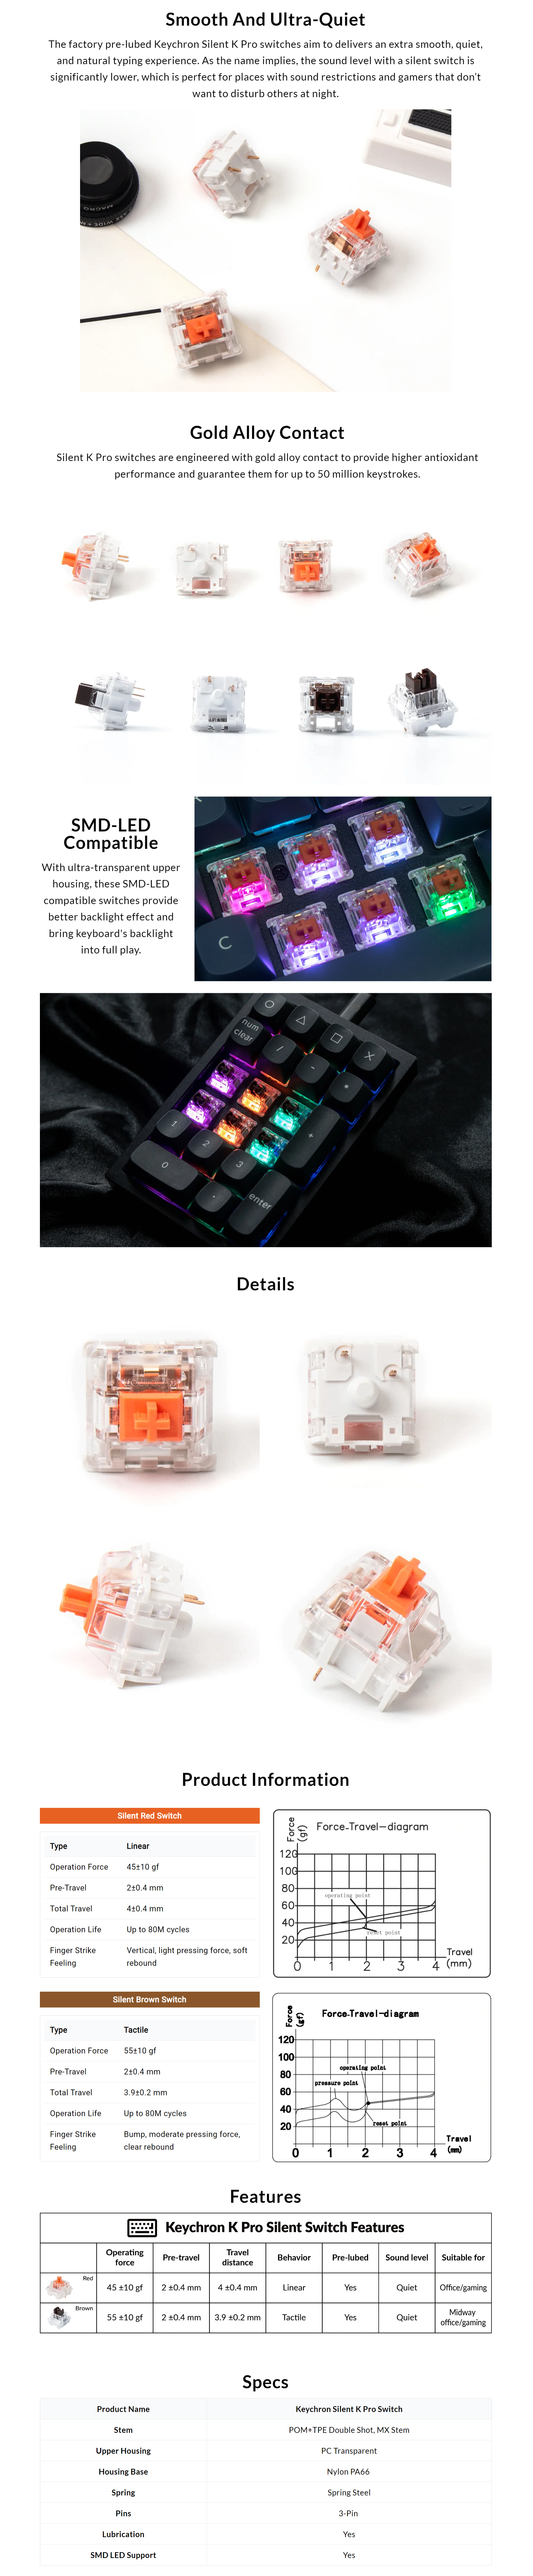 A large marketing image providing additional information about the product Keychron Silent K Pro Switch 110 pcs - Brown - Additional alt info not provided